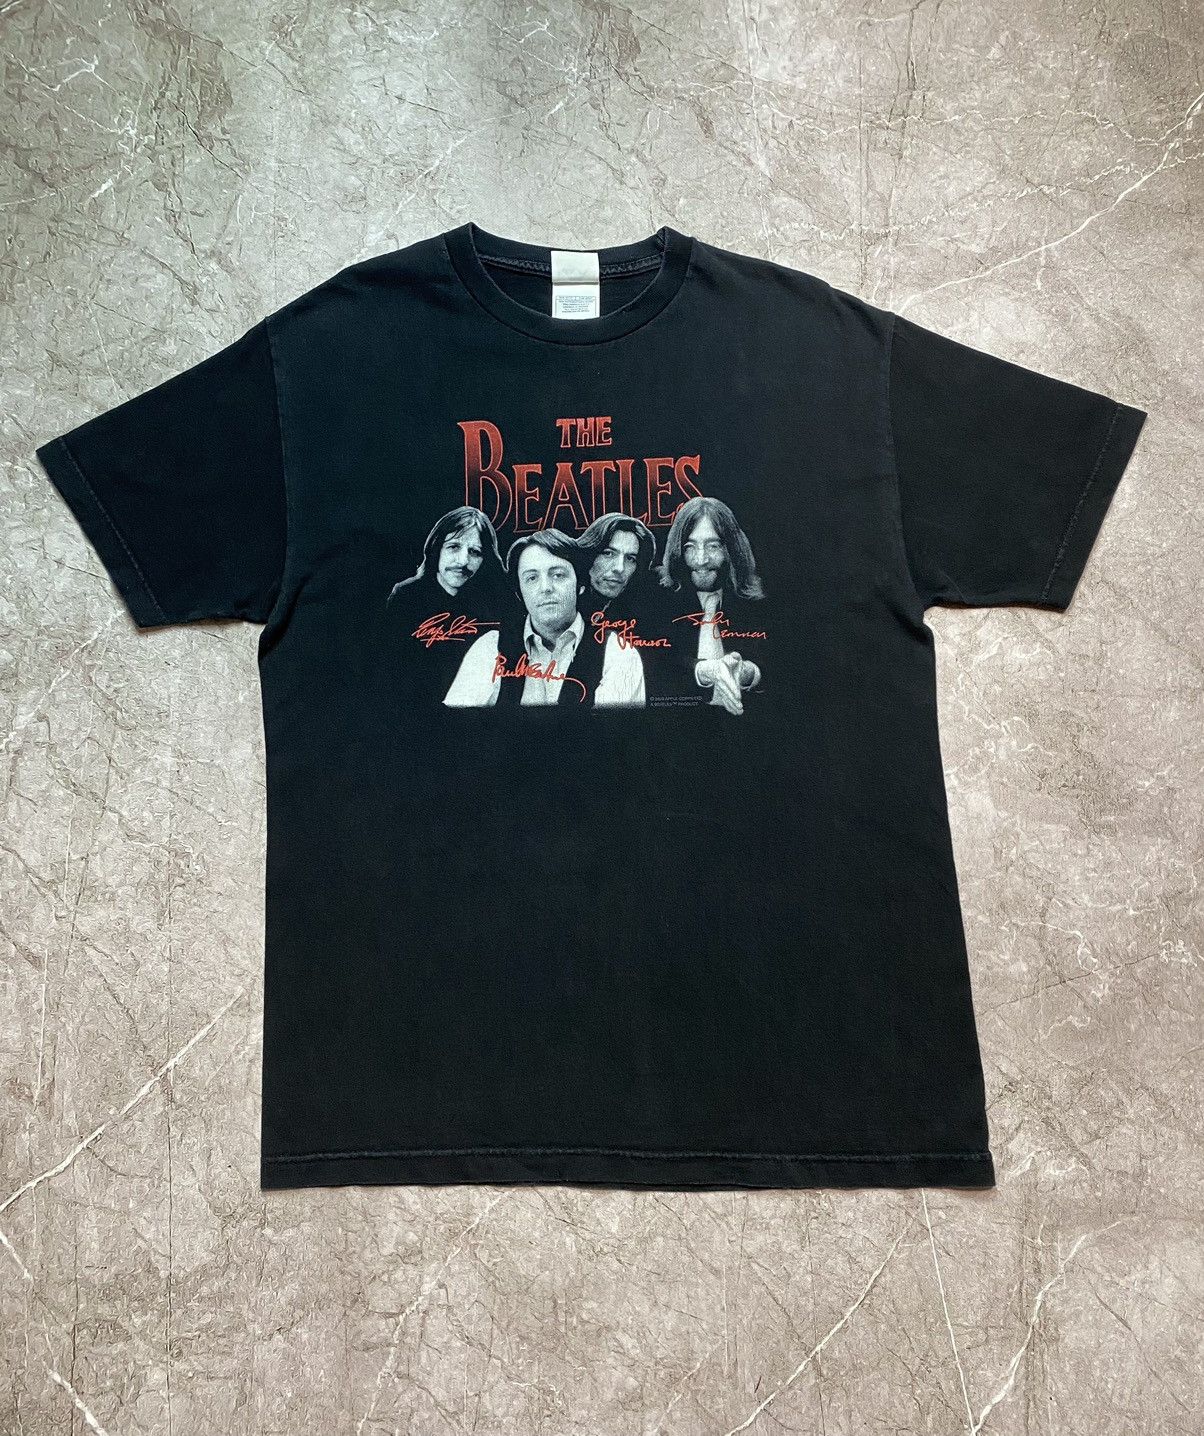 Pre-owned Band Tees X Vintage 2003 The Beatles Black Graphic Band T-shirt